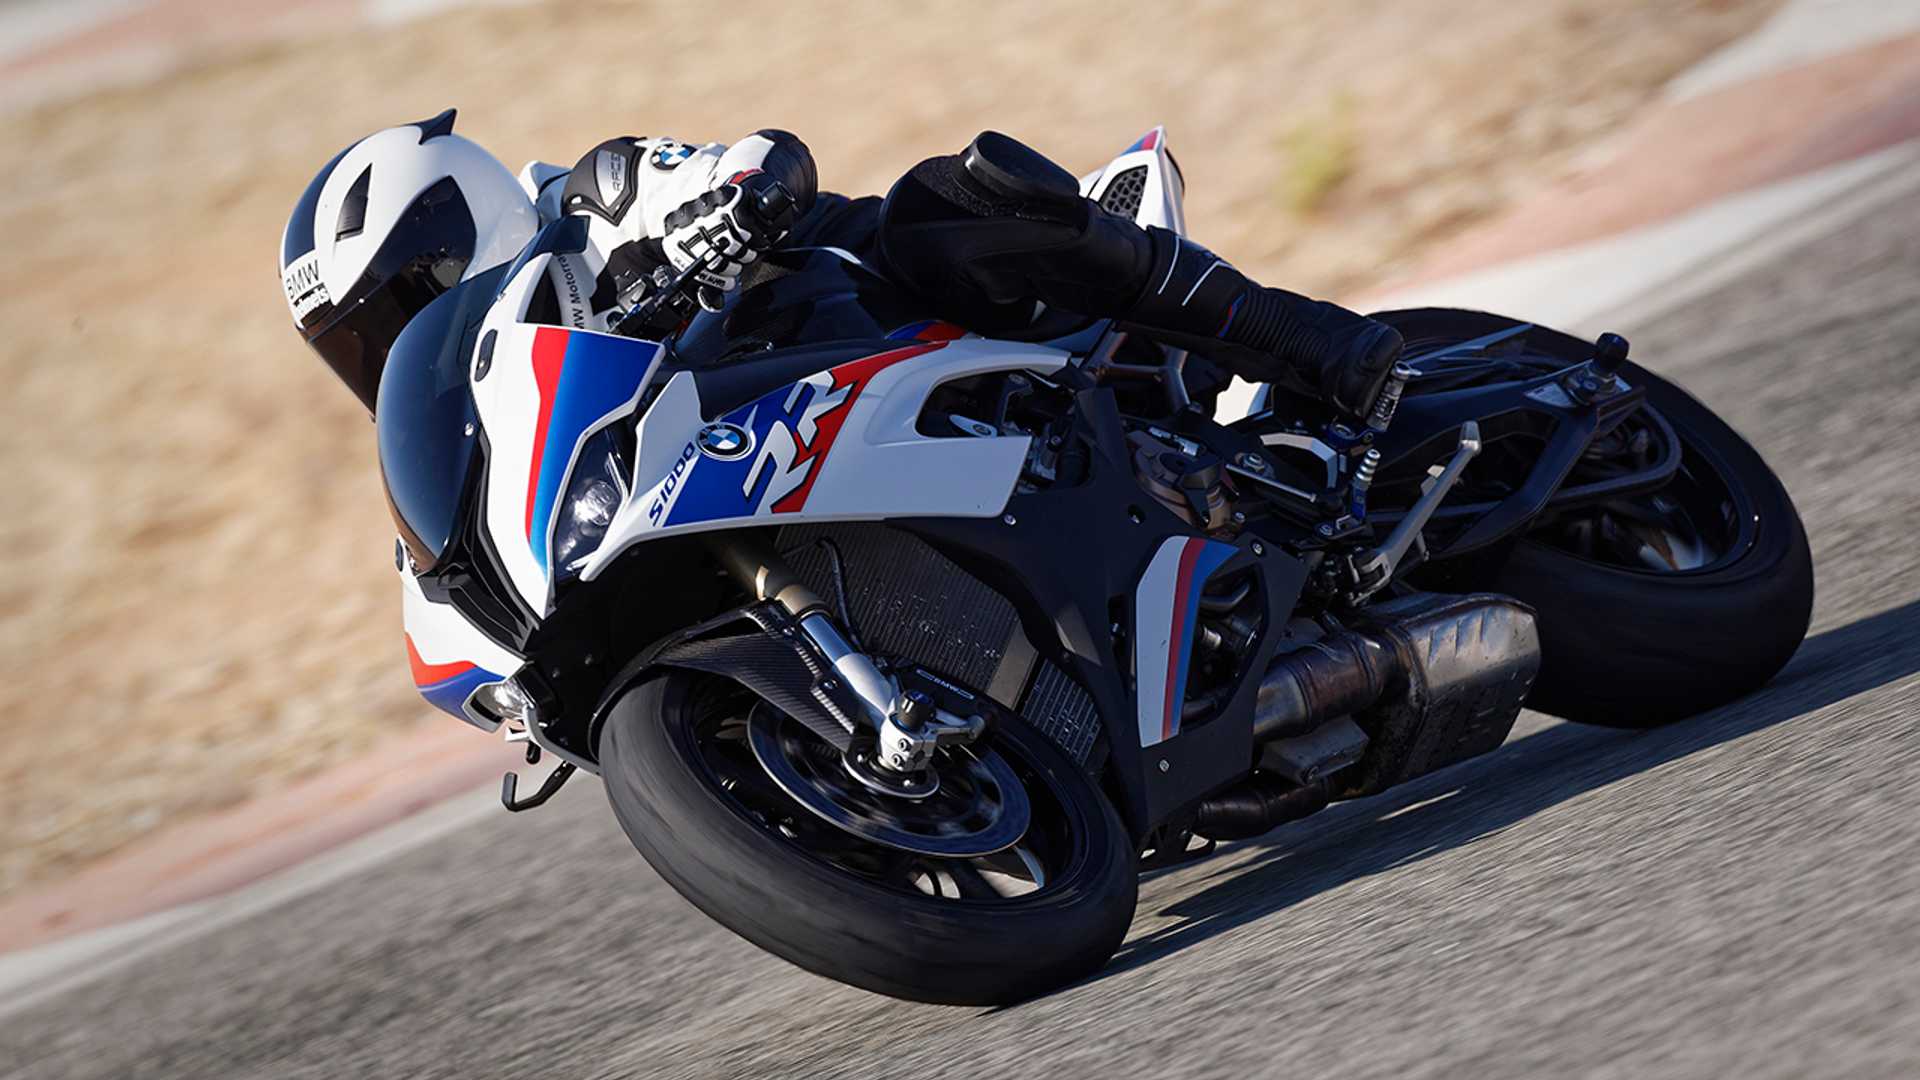 BMW S 1000 RR: Everything We Know